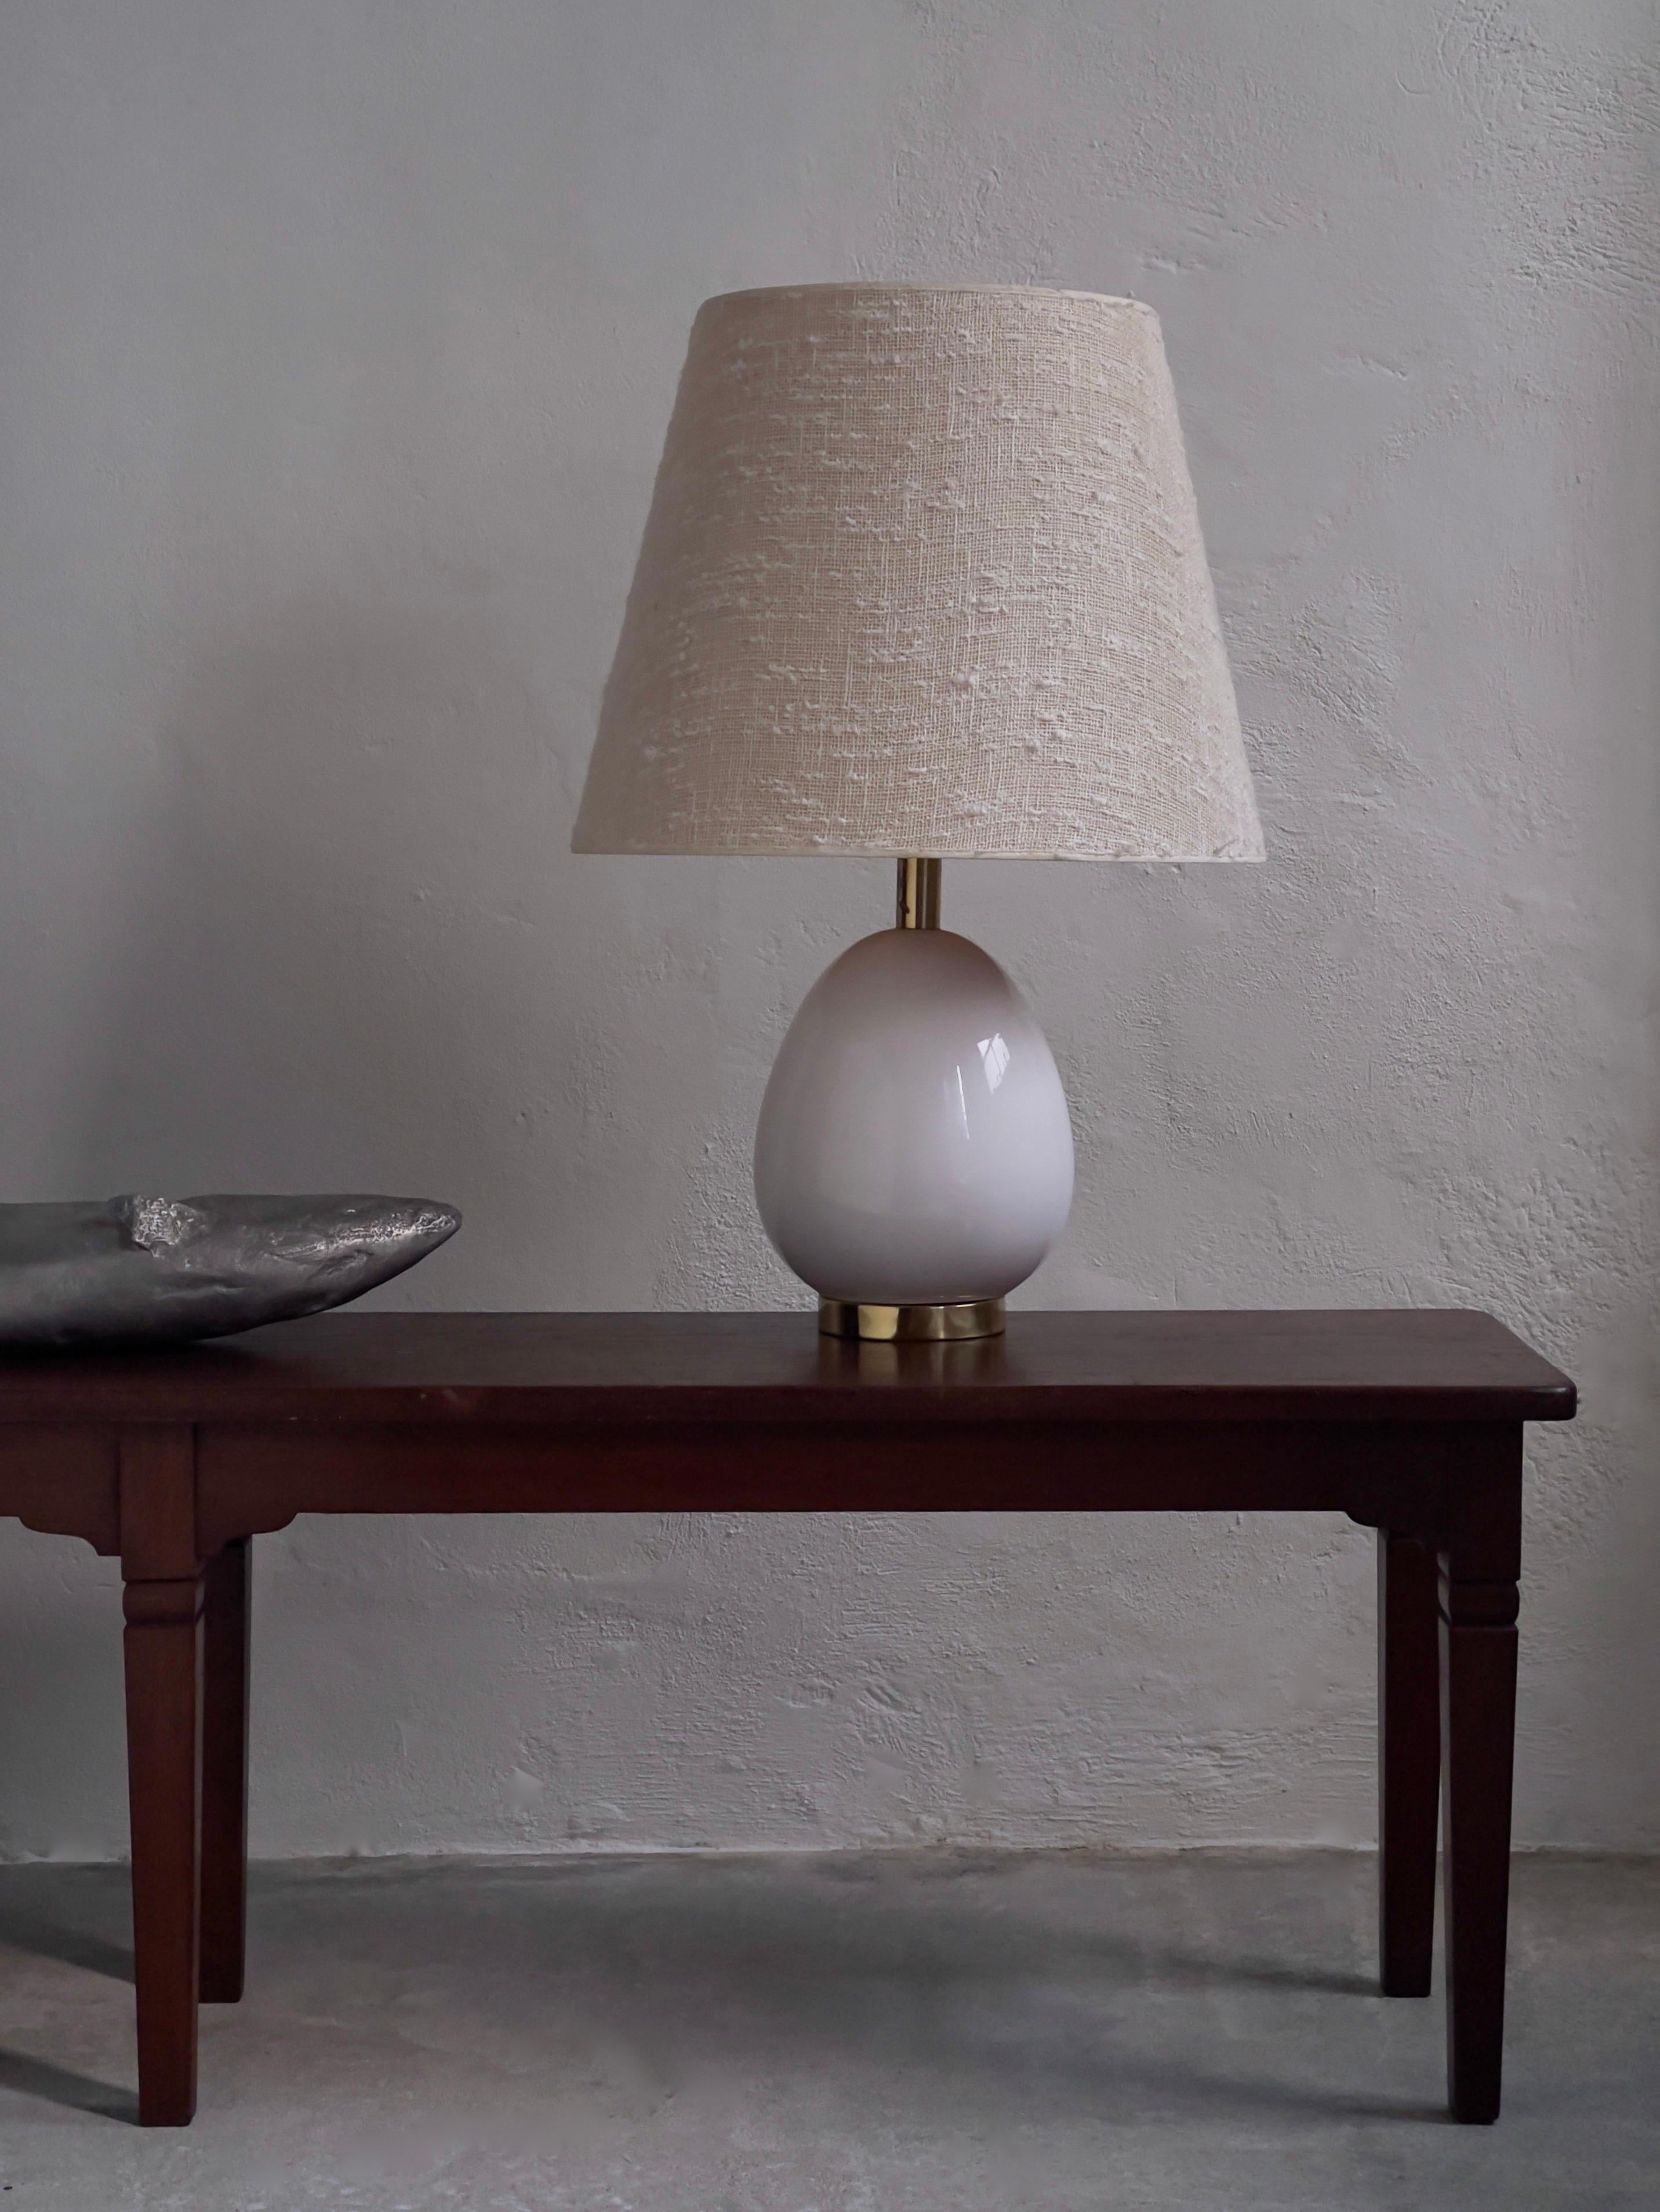 Rare scandinavian mid century white glazed ceramic table lamp with solid brass base and middle part. This impressive Swedish manufactured lamp by renowned Bergboms in the 1960s is in great condition with only minor dent in the solid brass base. The